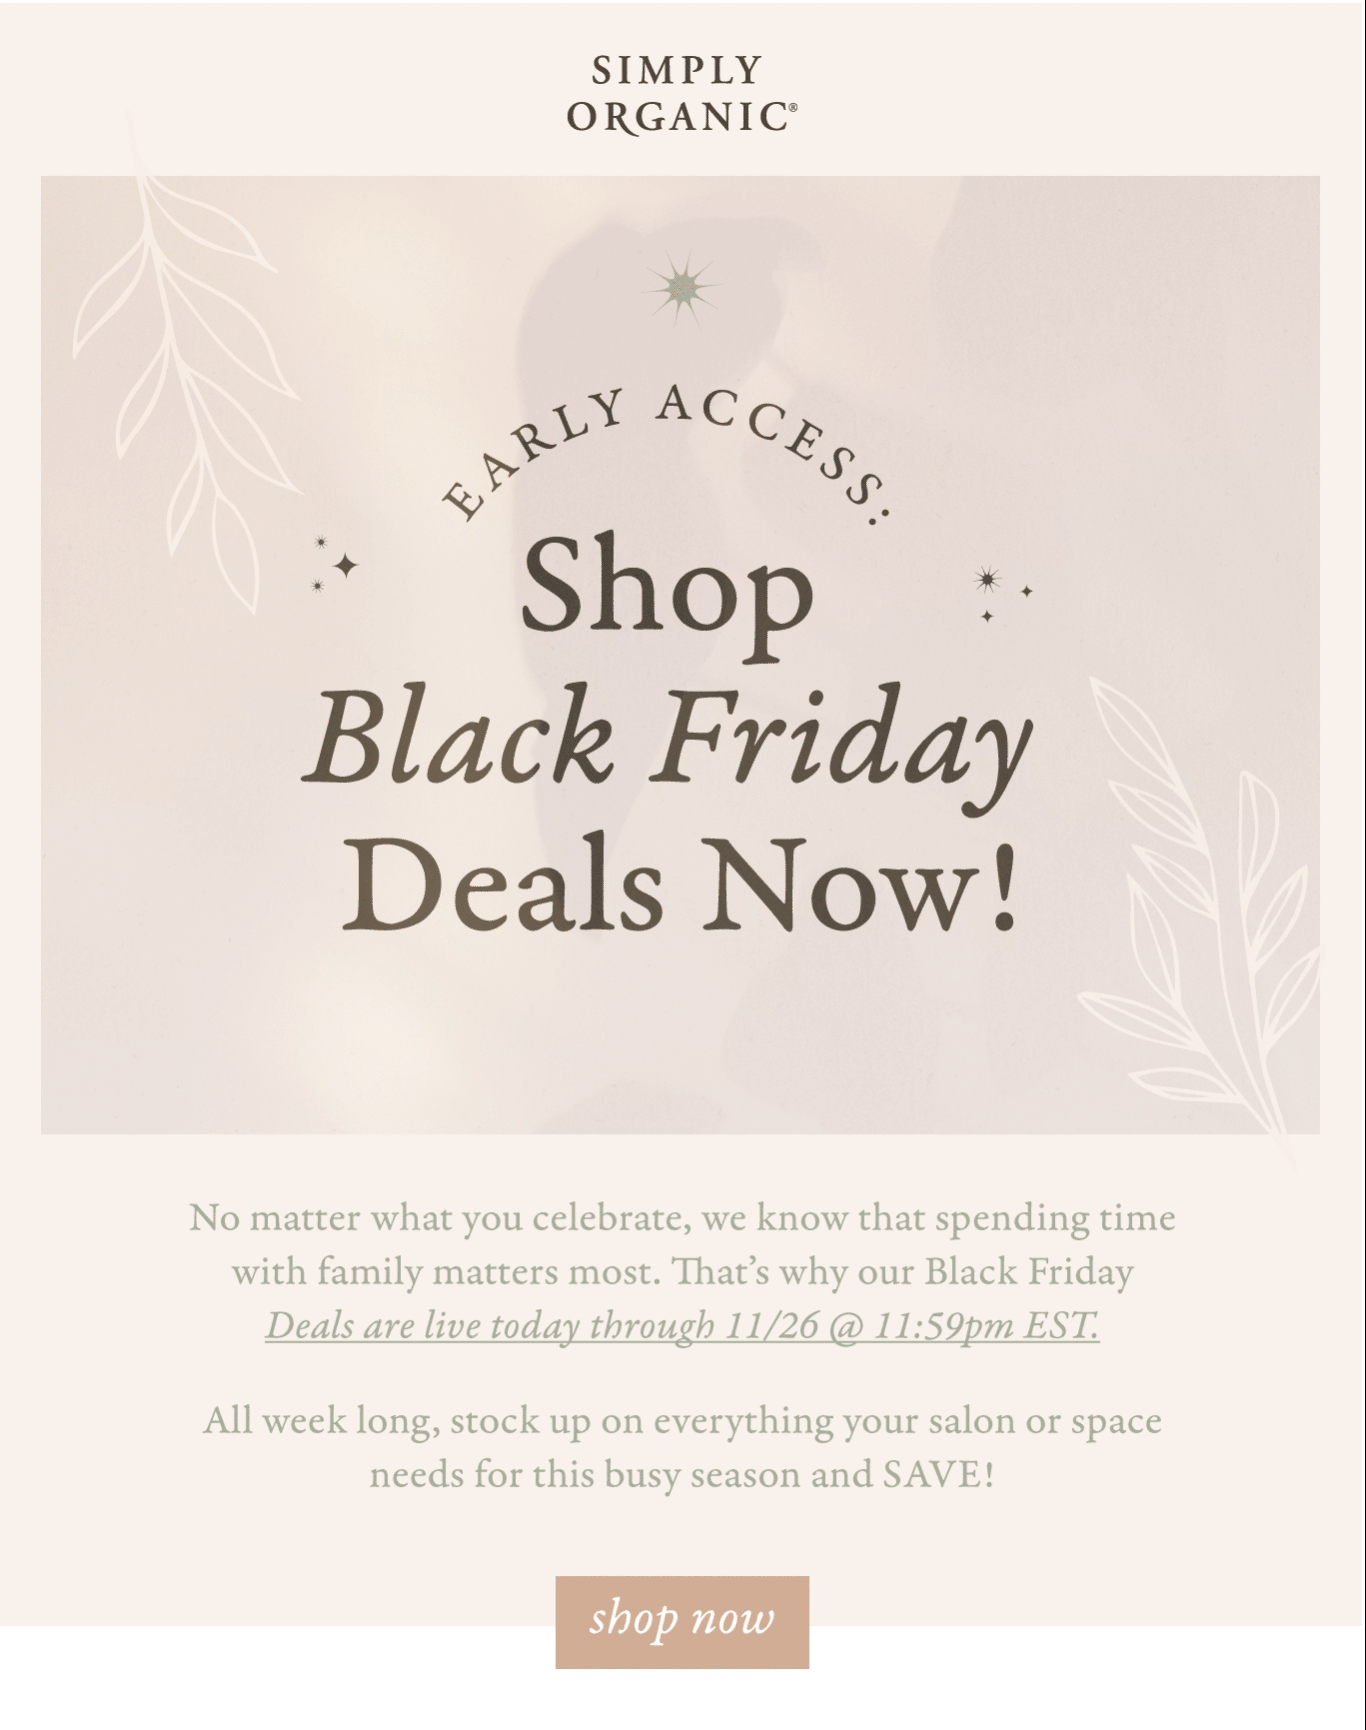 SIMPLY ORGANIC * A %"Y 2 % 3 Shop . Black Friday Deals Now! No matter what you celebrate, we know that spending time with family matters most. Thats why our Black Friday Deals are live today through 1126 @ 11:59pm EST. All week long, stock up on everything your salon or space needs for this busy season and SAVE! 